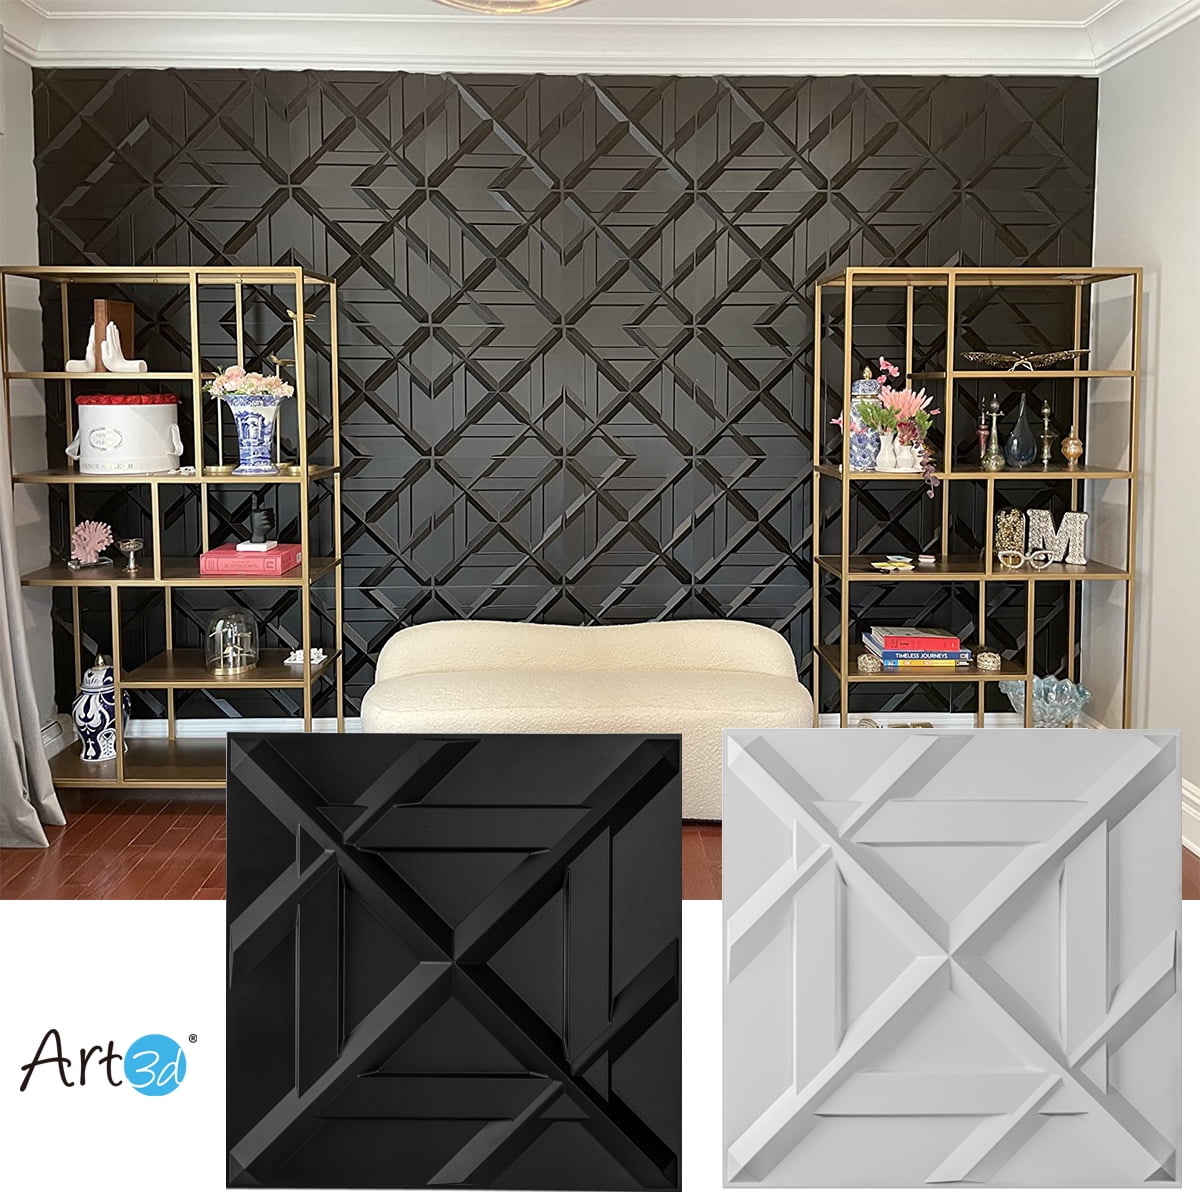 Art3dwallpanels 19.7 in. x 19.7 in. 32 Sq. ft. White PVC 3D Wall Panel Star Textured for Interior Wall Decor (Pack of 12-Tiles)